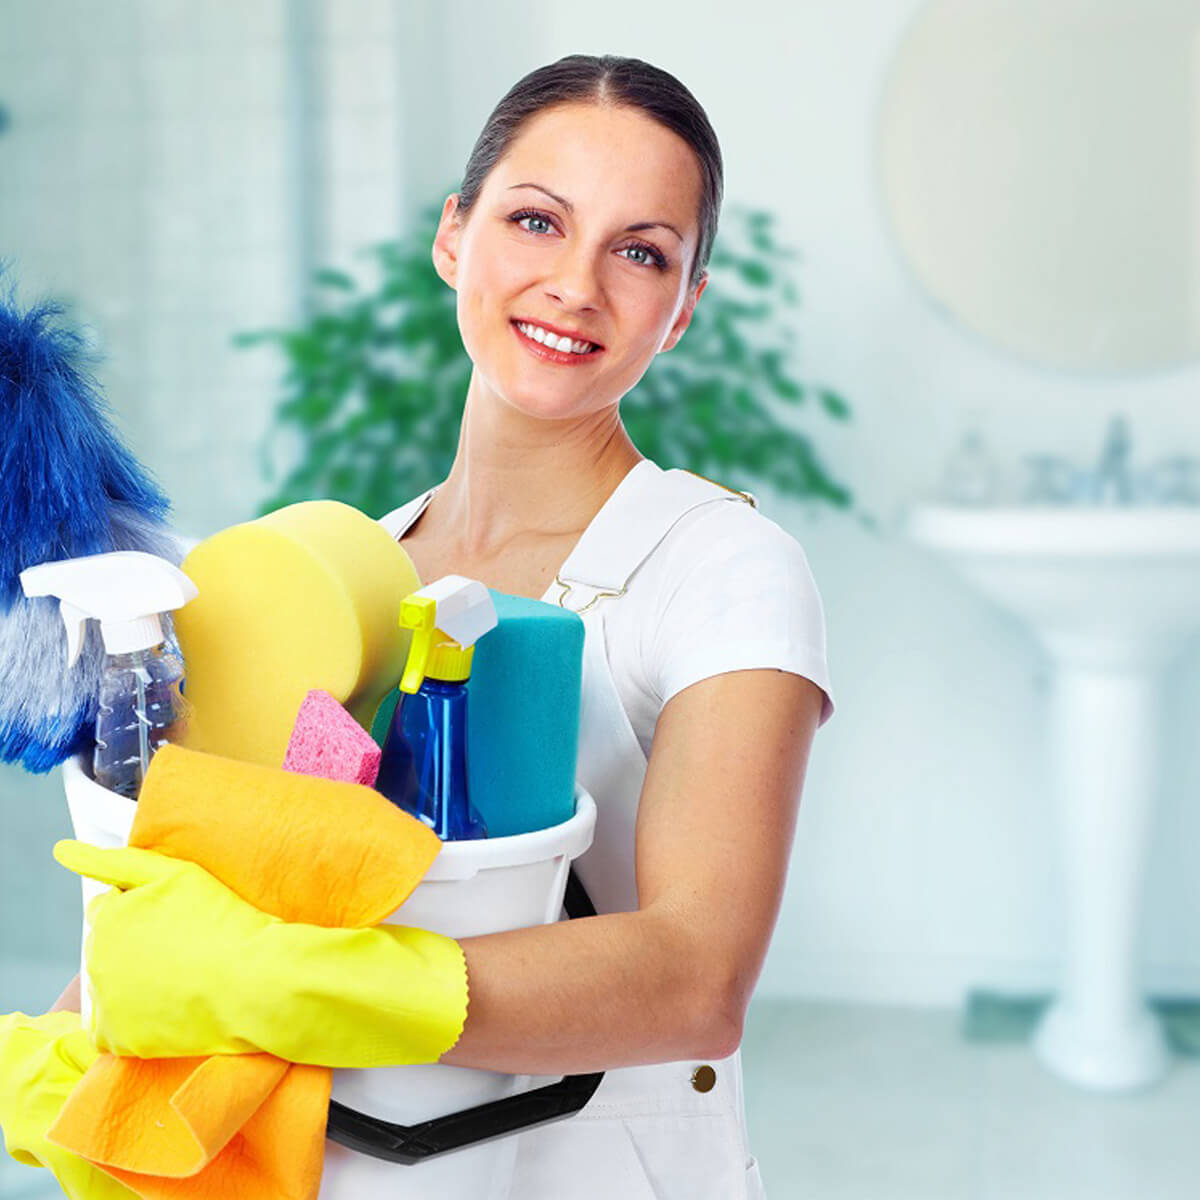 Why Choose Sparkle End Of Lease Cleaning In Perth?